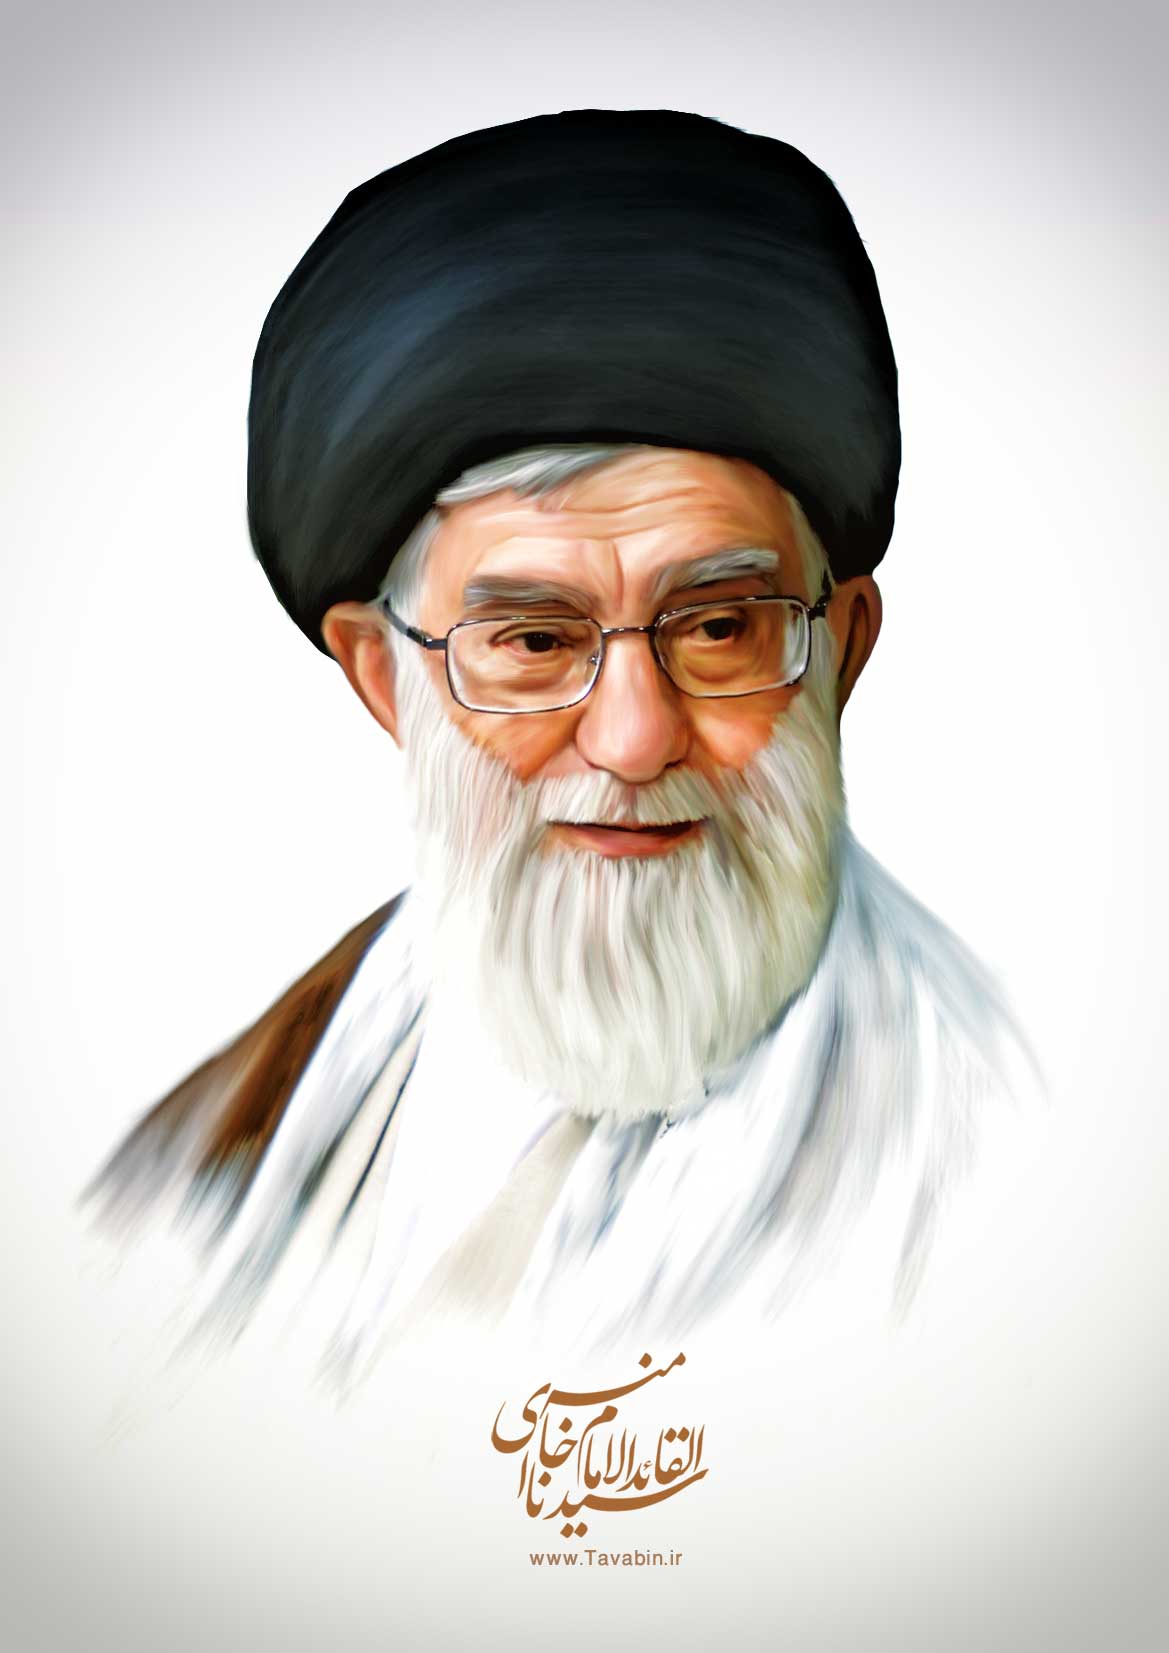 Image result for ‫خامنه ای‬‎